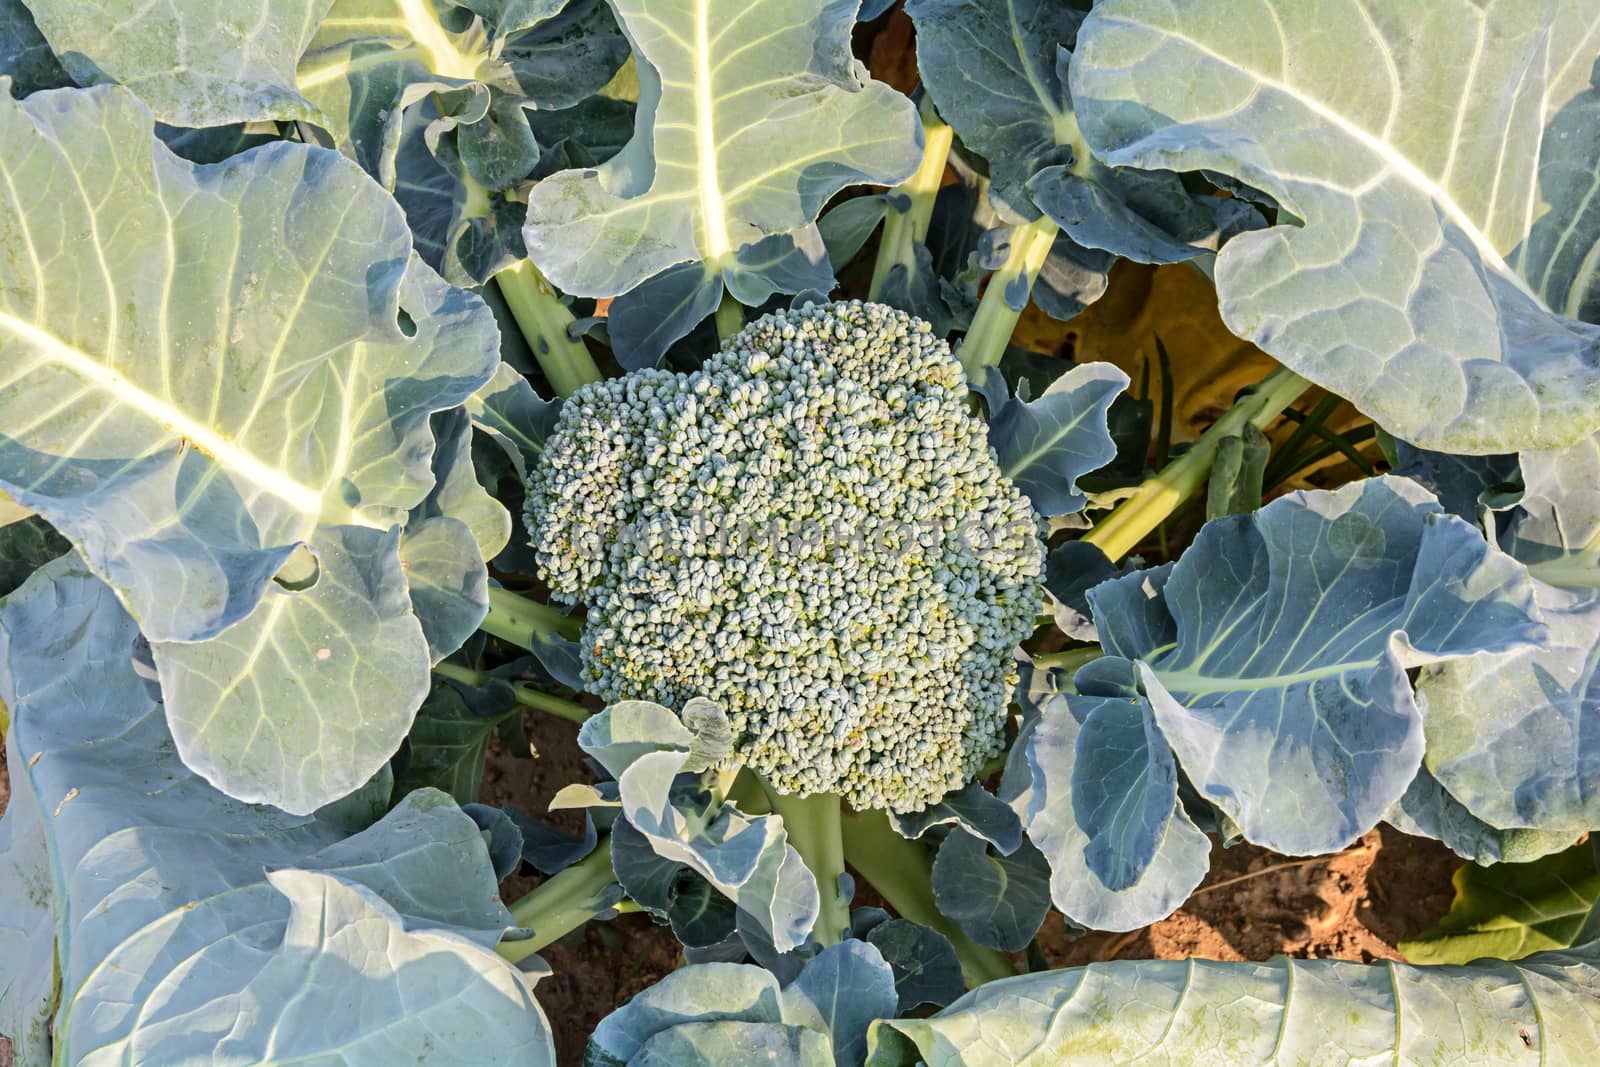 Broccoli close up  in the agricultural garden